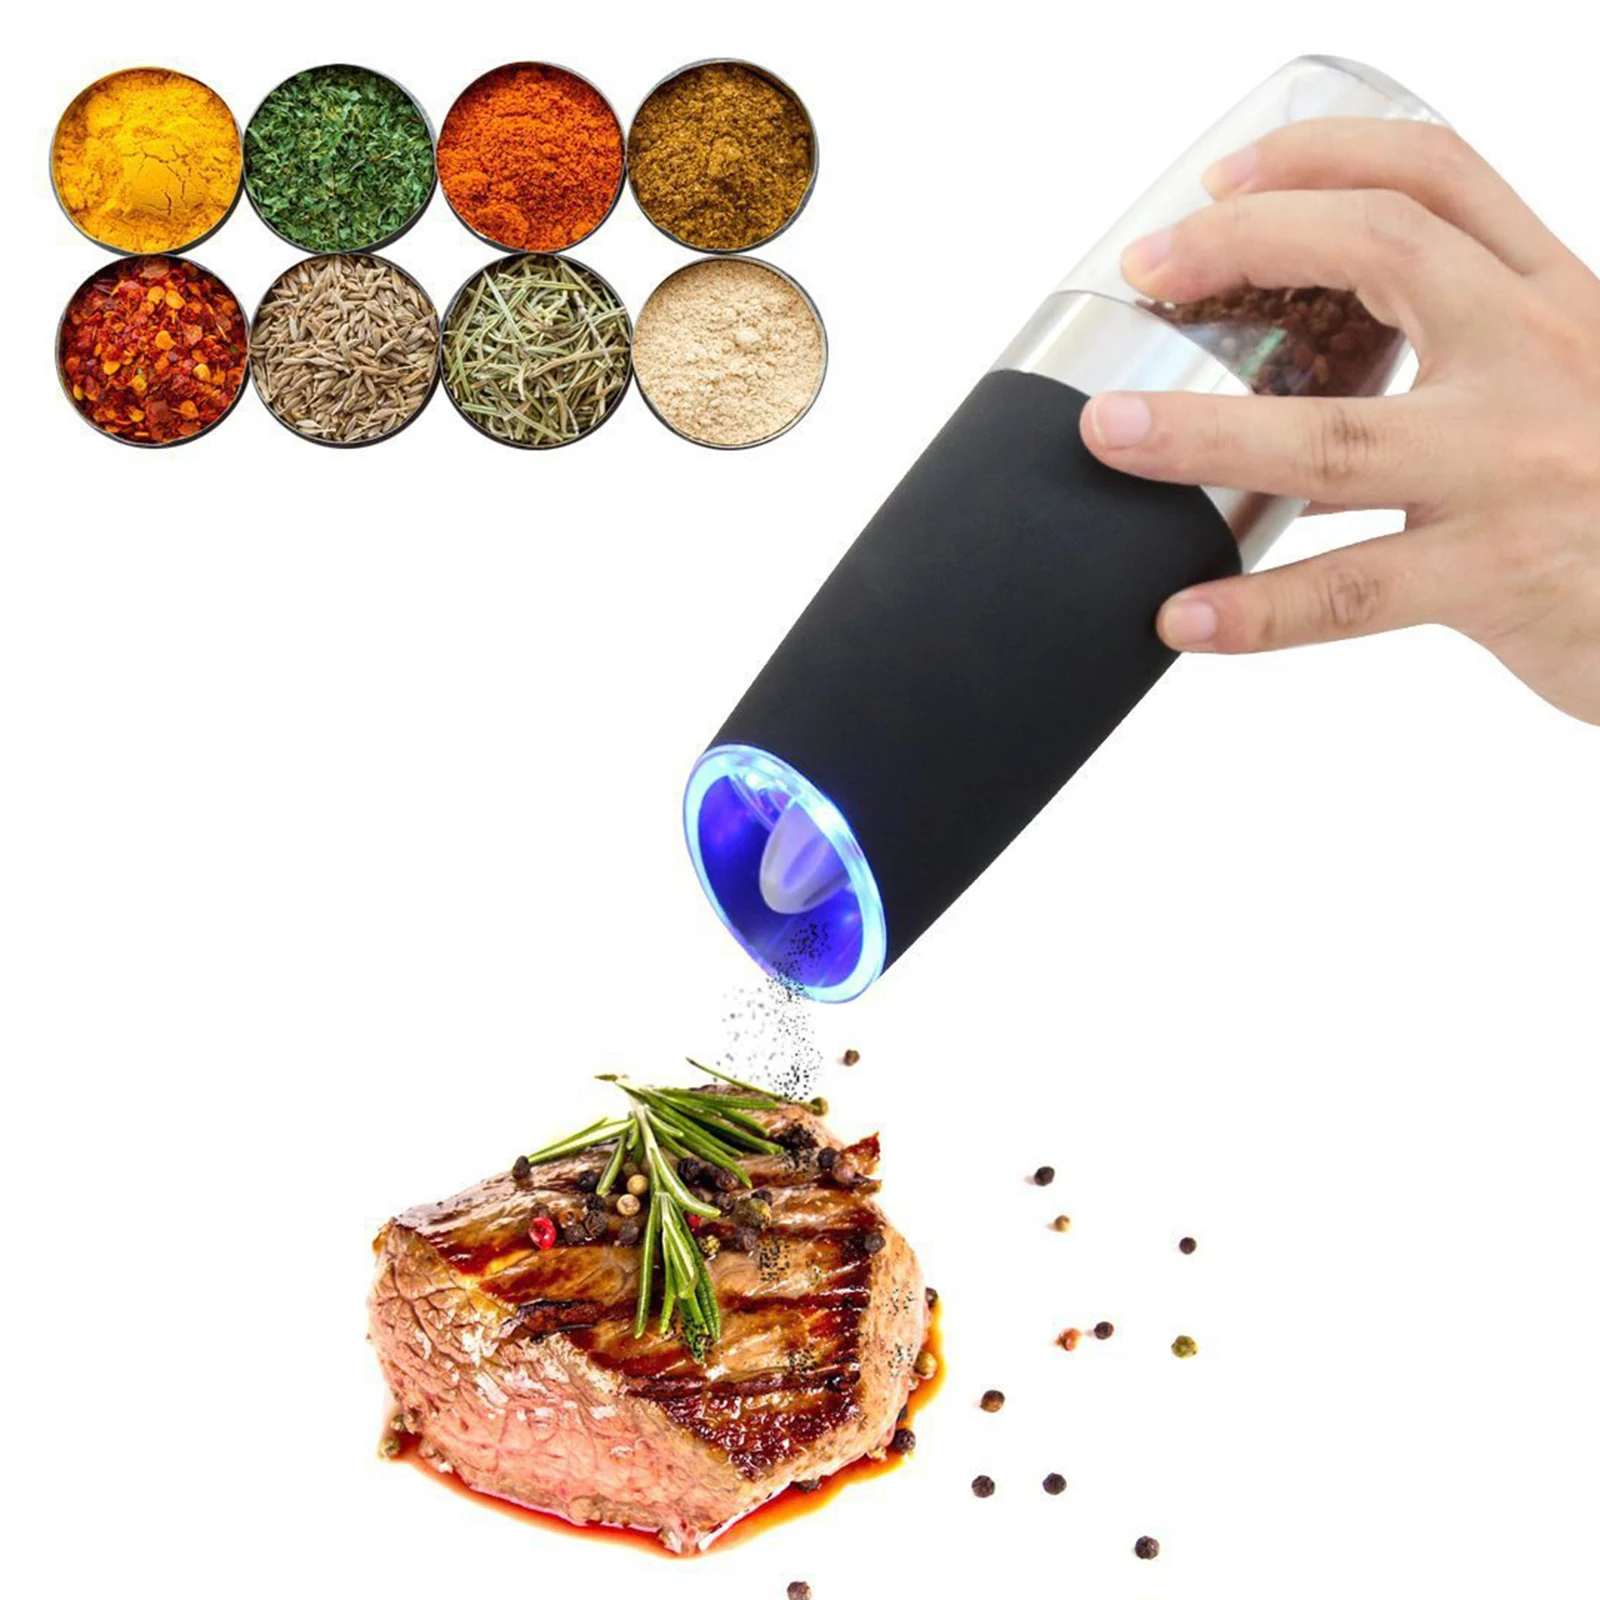 

Amazon-Quality Electric Pepper Mill Gravity Induction Stainless Steel Salt Spice Grinder LED Light Kitchen Tool